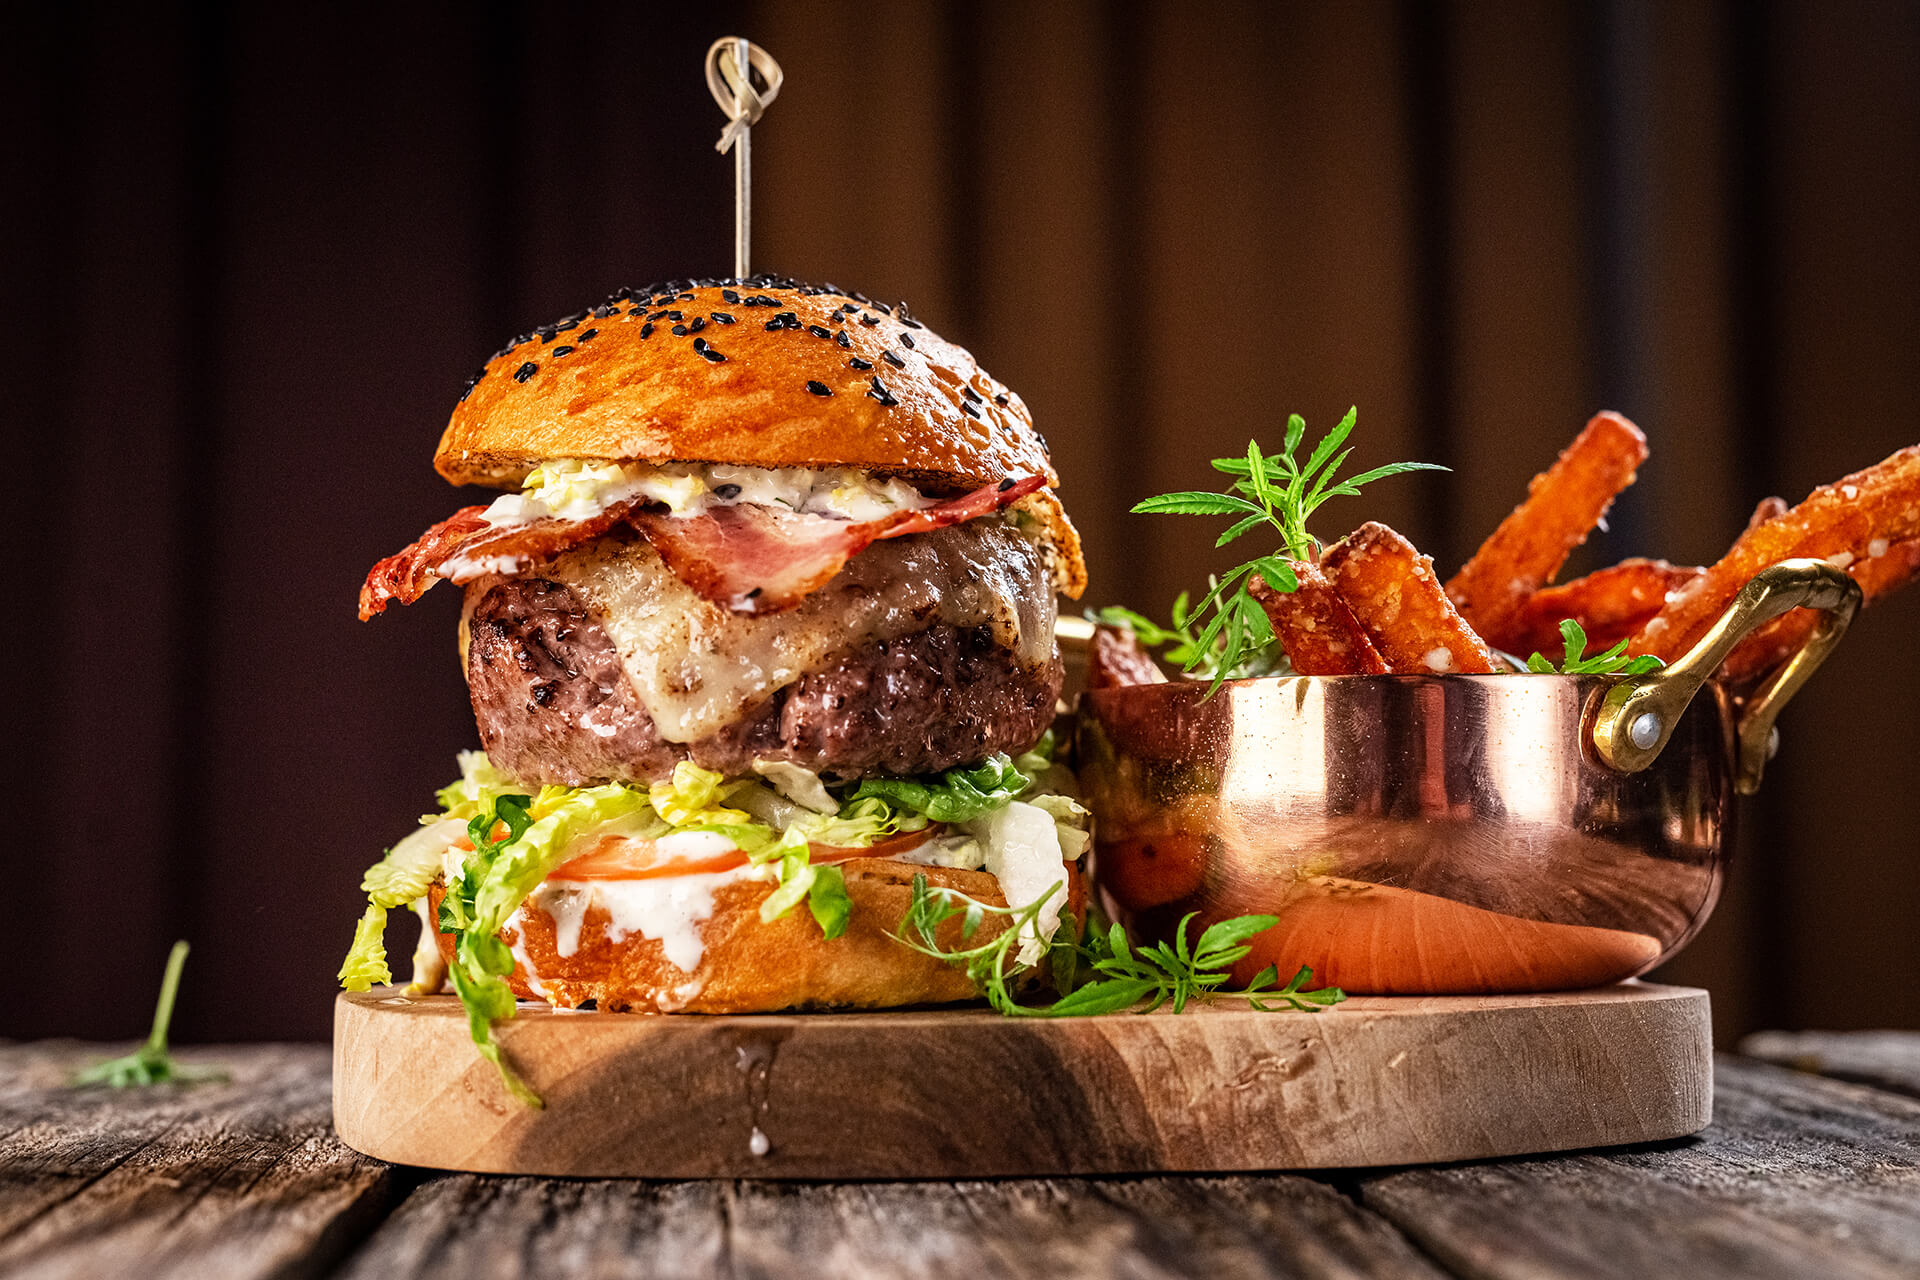 dining image of amazing burger and upscale take on french fries